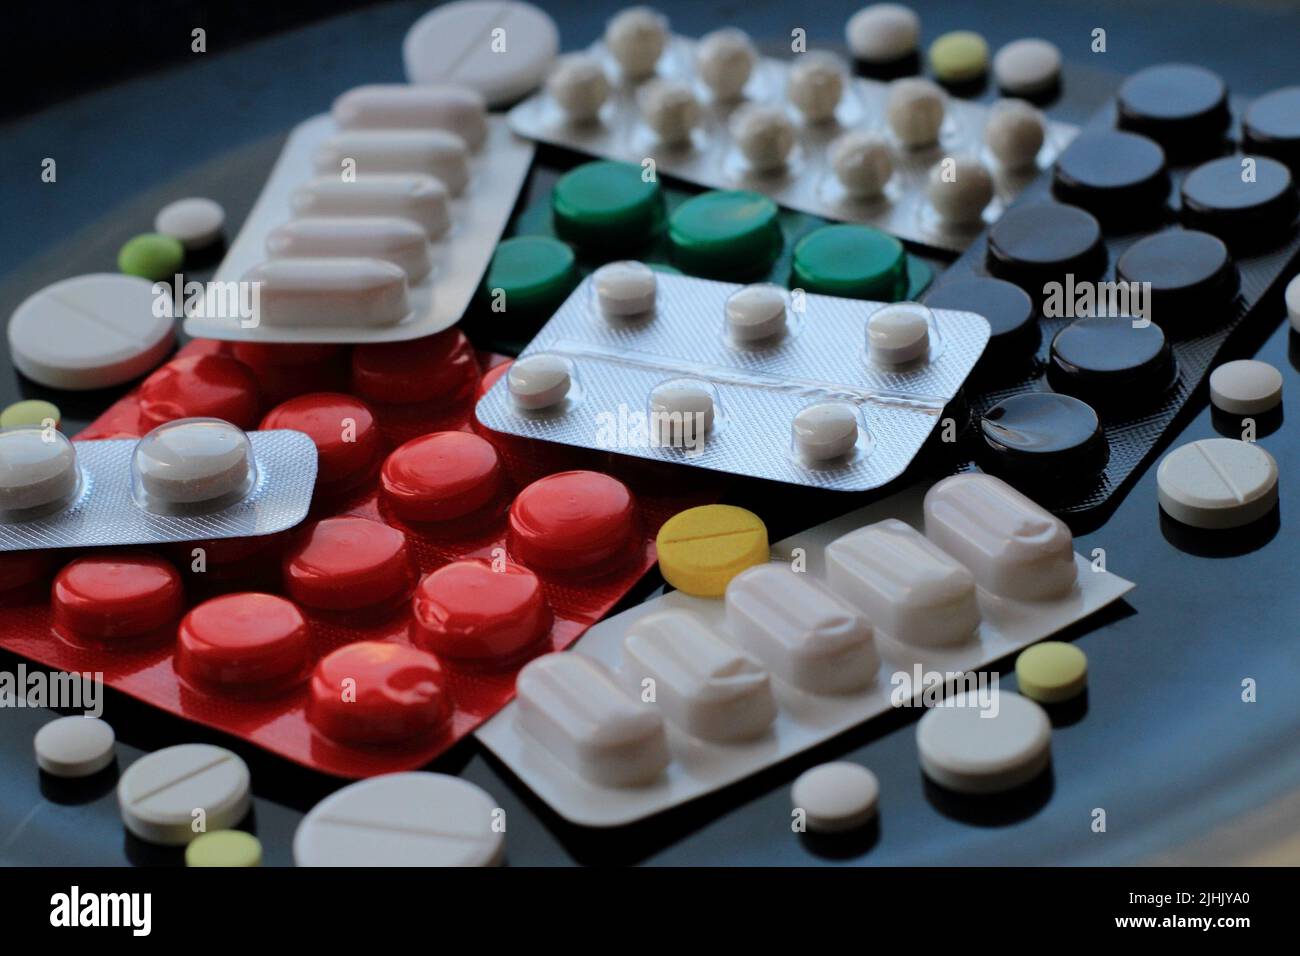 Tablets in different blisters and packages isolated on black surface Stock Photo